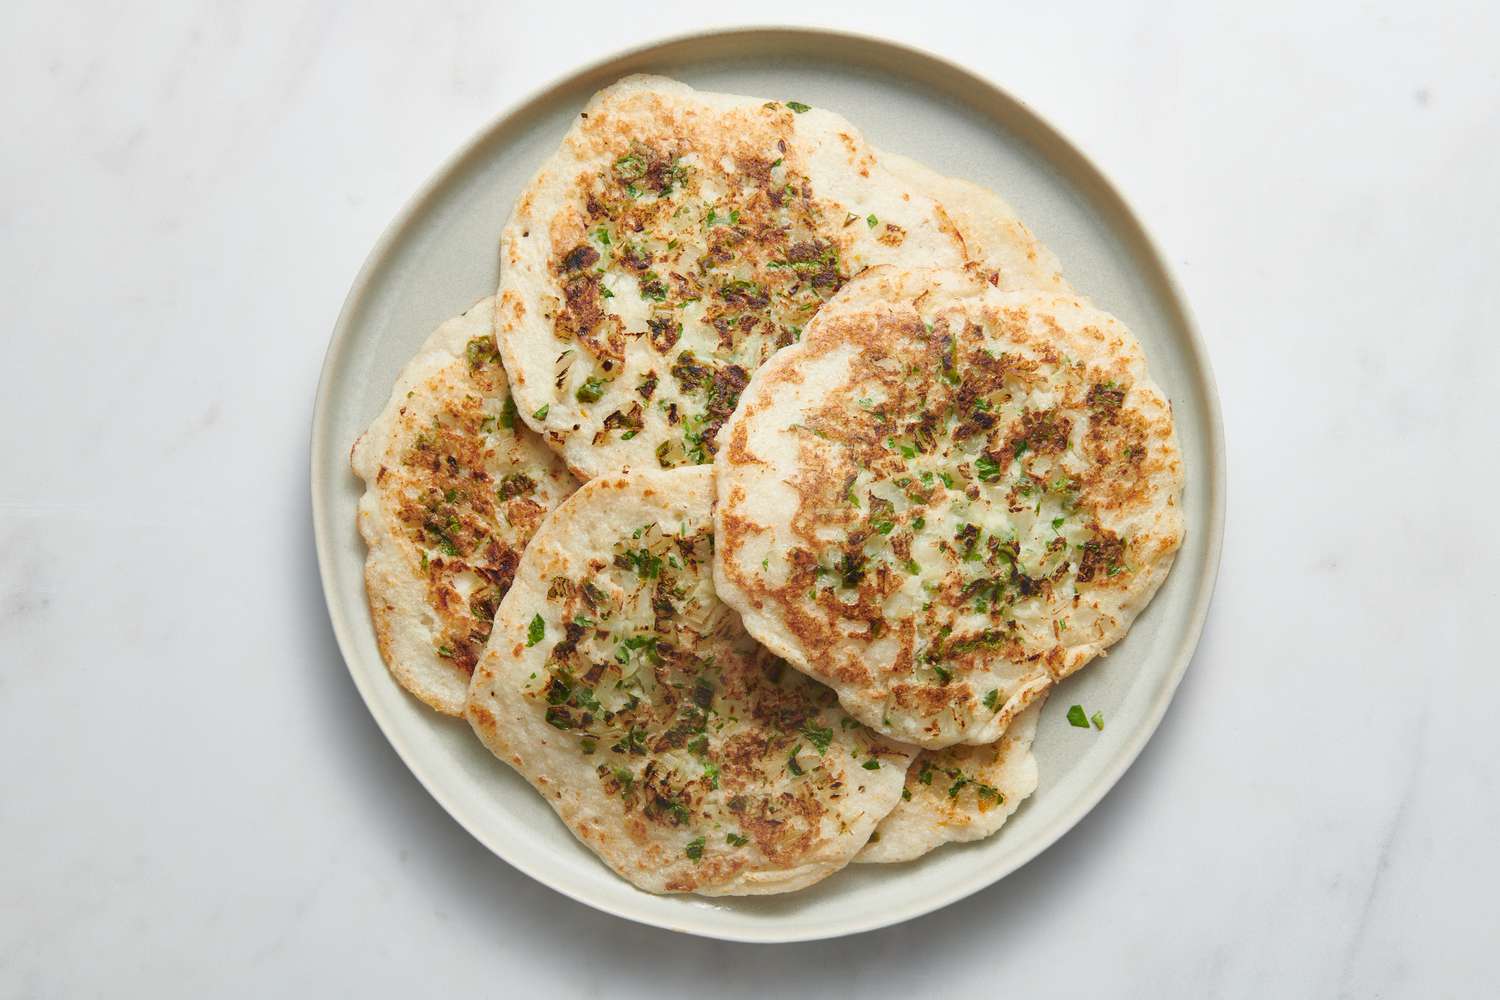 A platter of cooked uttapam